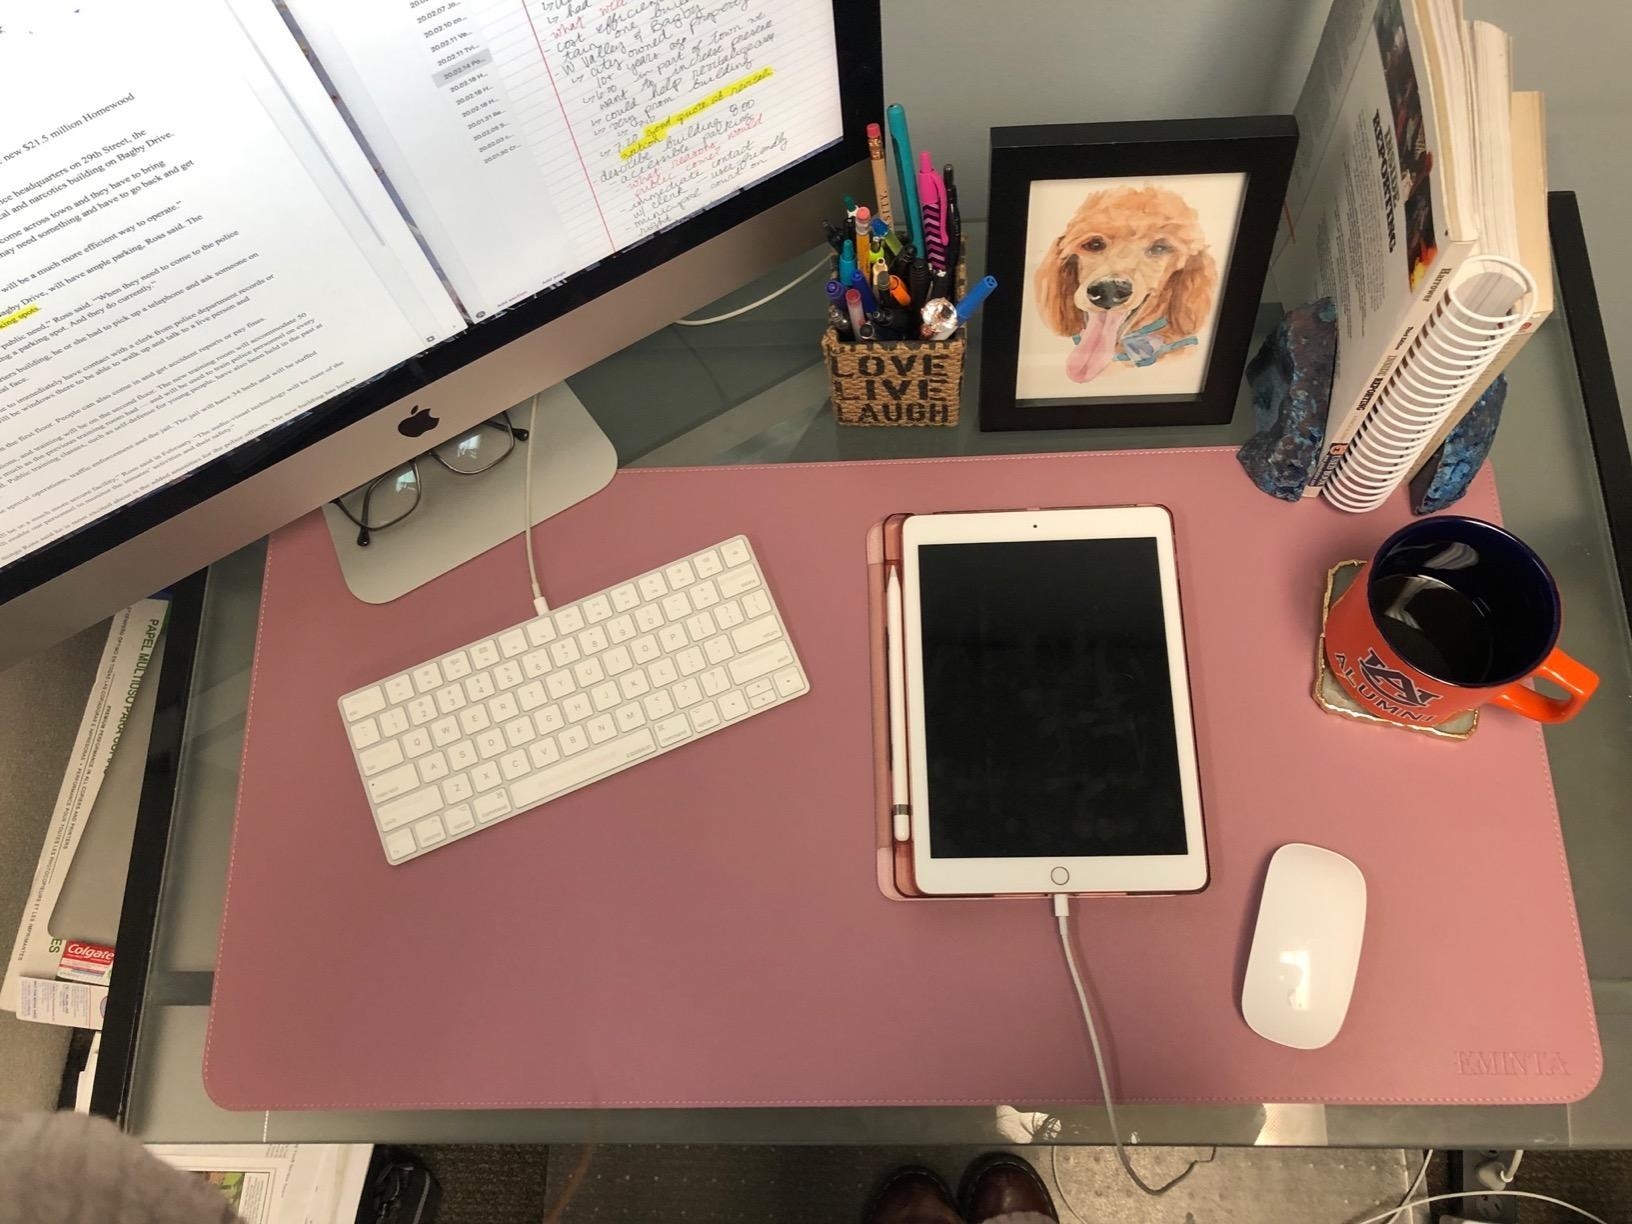 33 Home Office Essentials To Jazz Up Your WFH Space